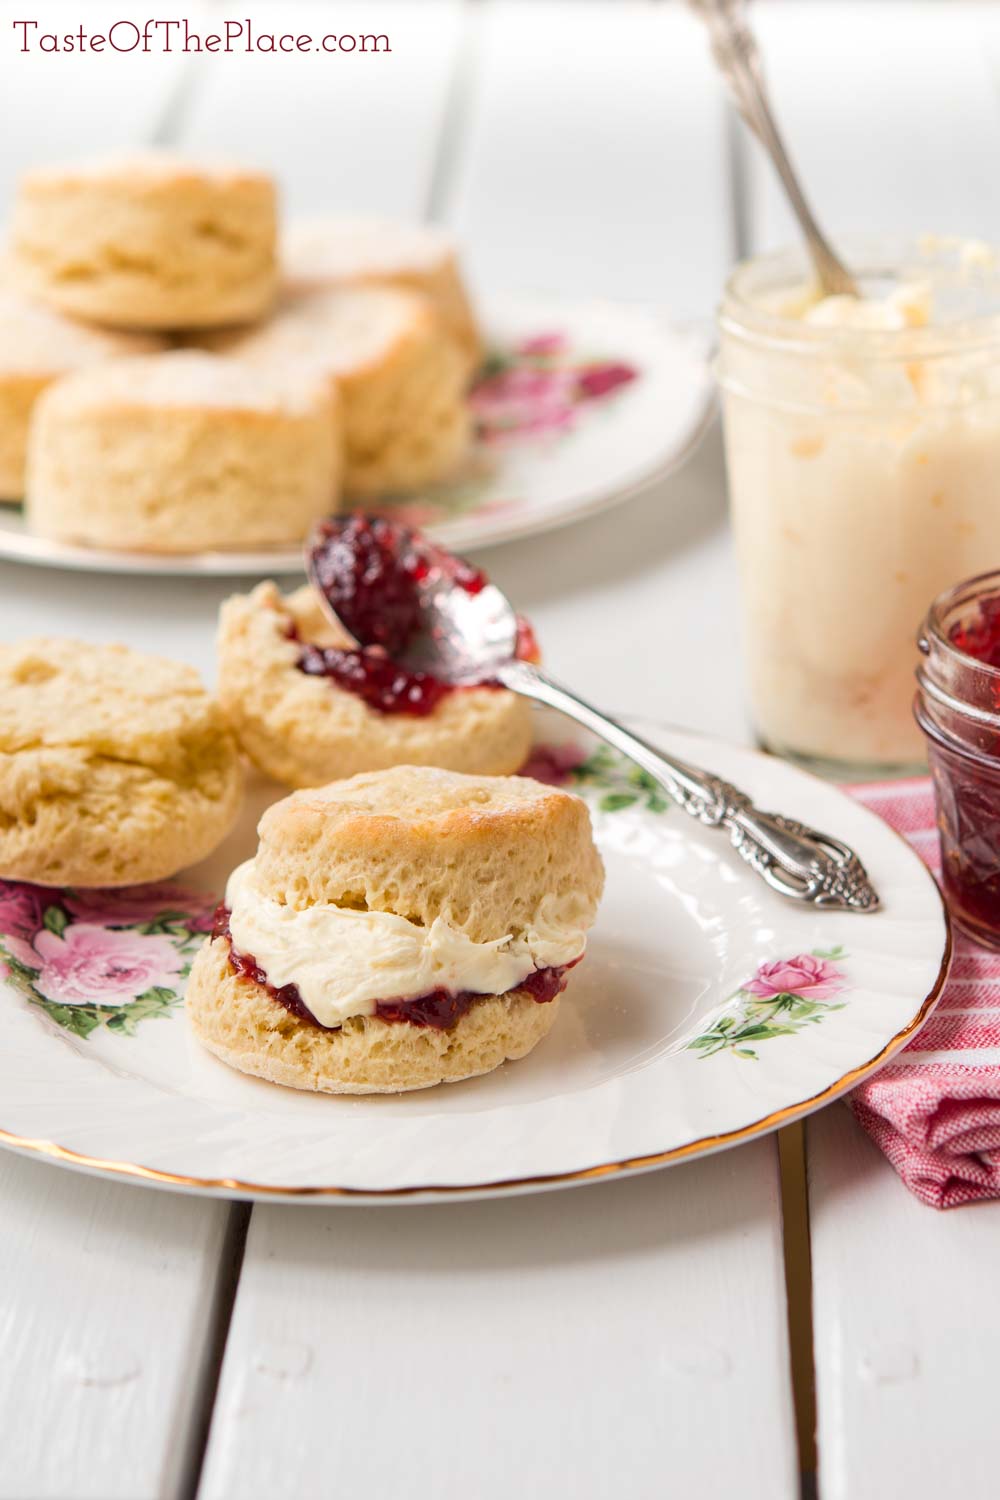 How to Put Together a British Style Cream Tea